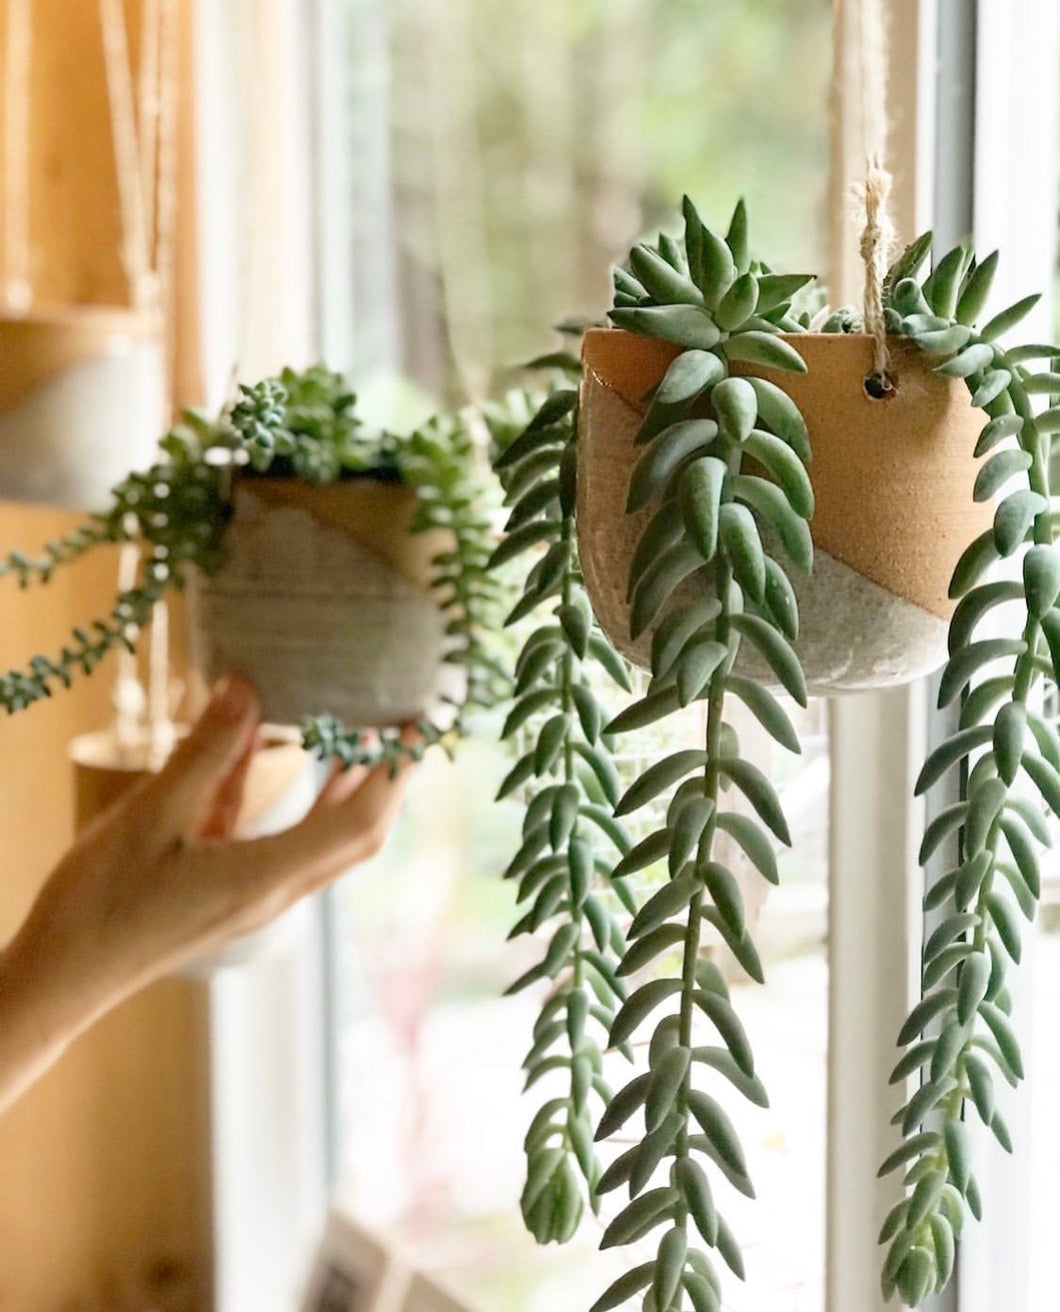 pottery hanging planters, hanging in the window, planted with succulents, burrow's tail